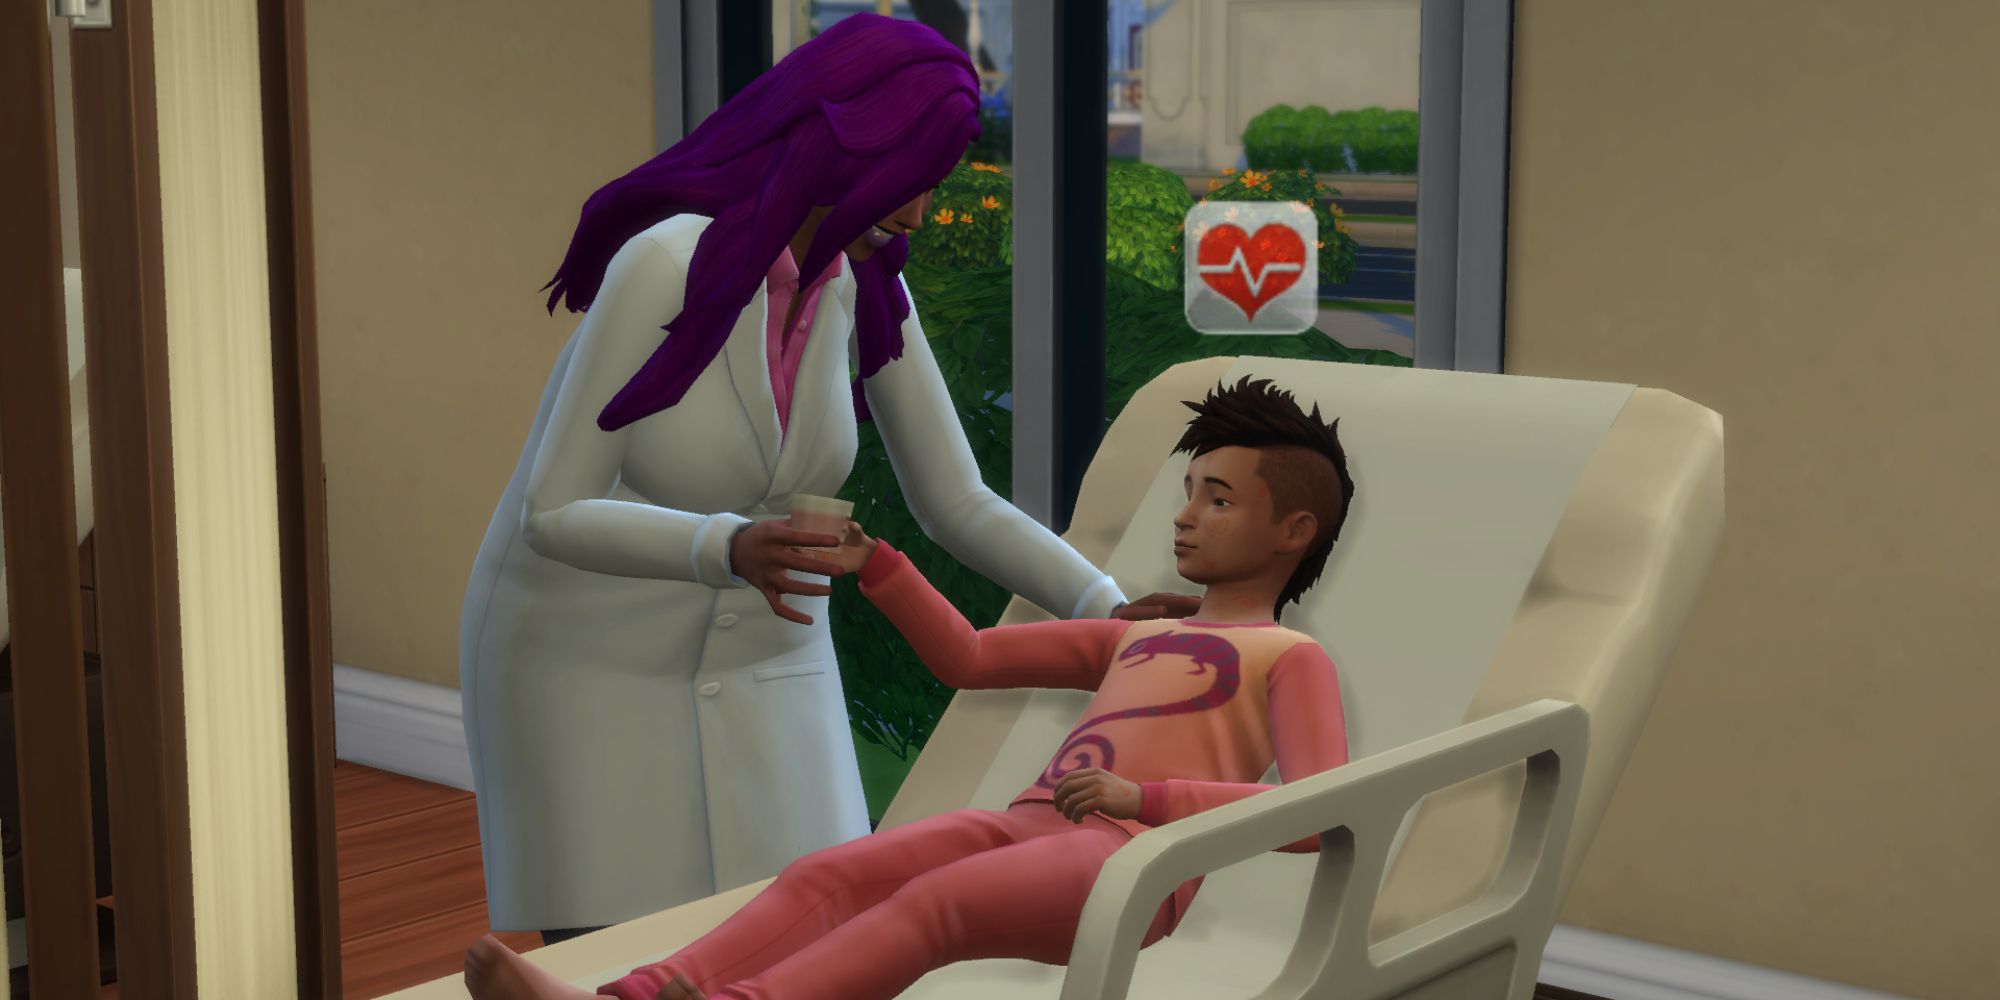 A doctor Sim gives her young patient medicine in The Sims 4